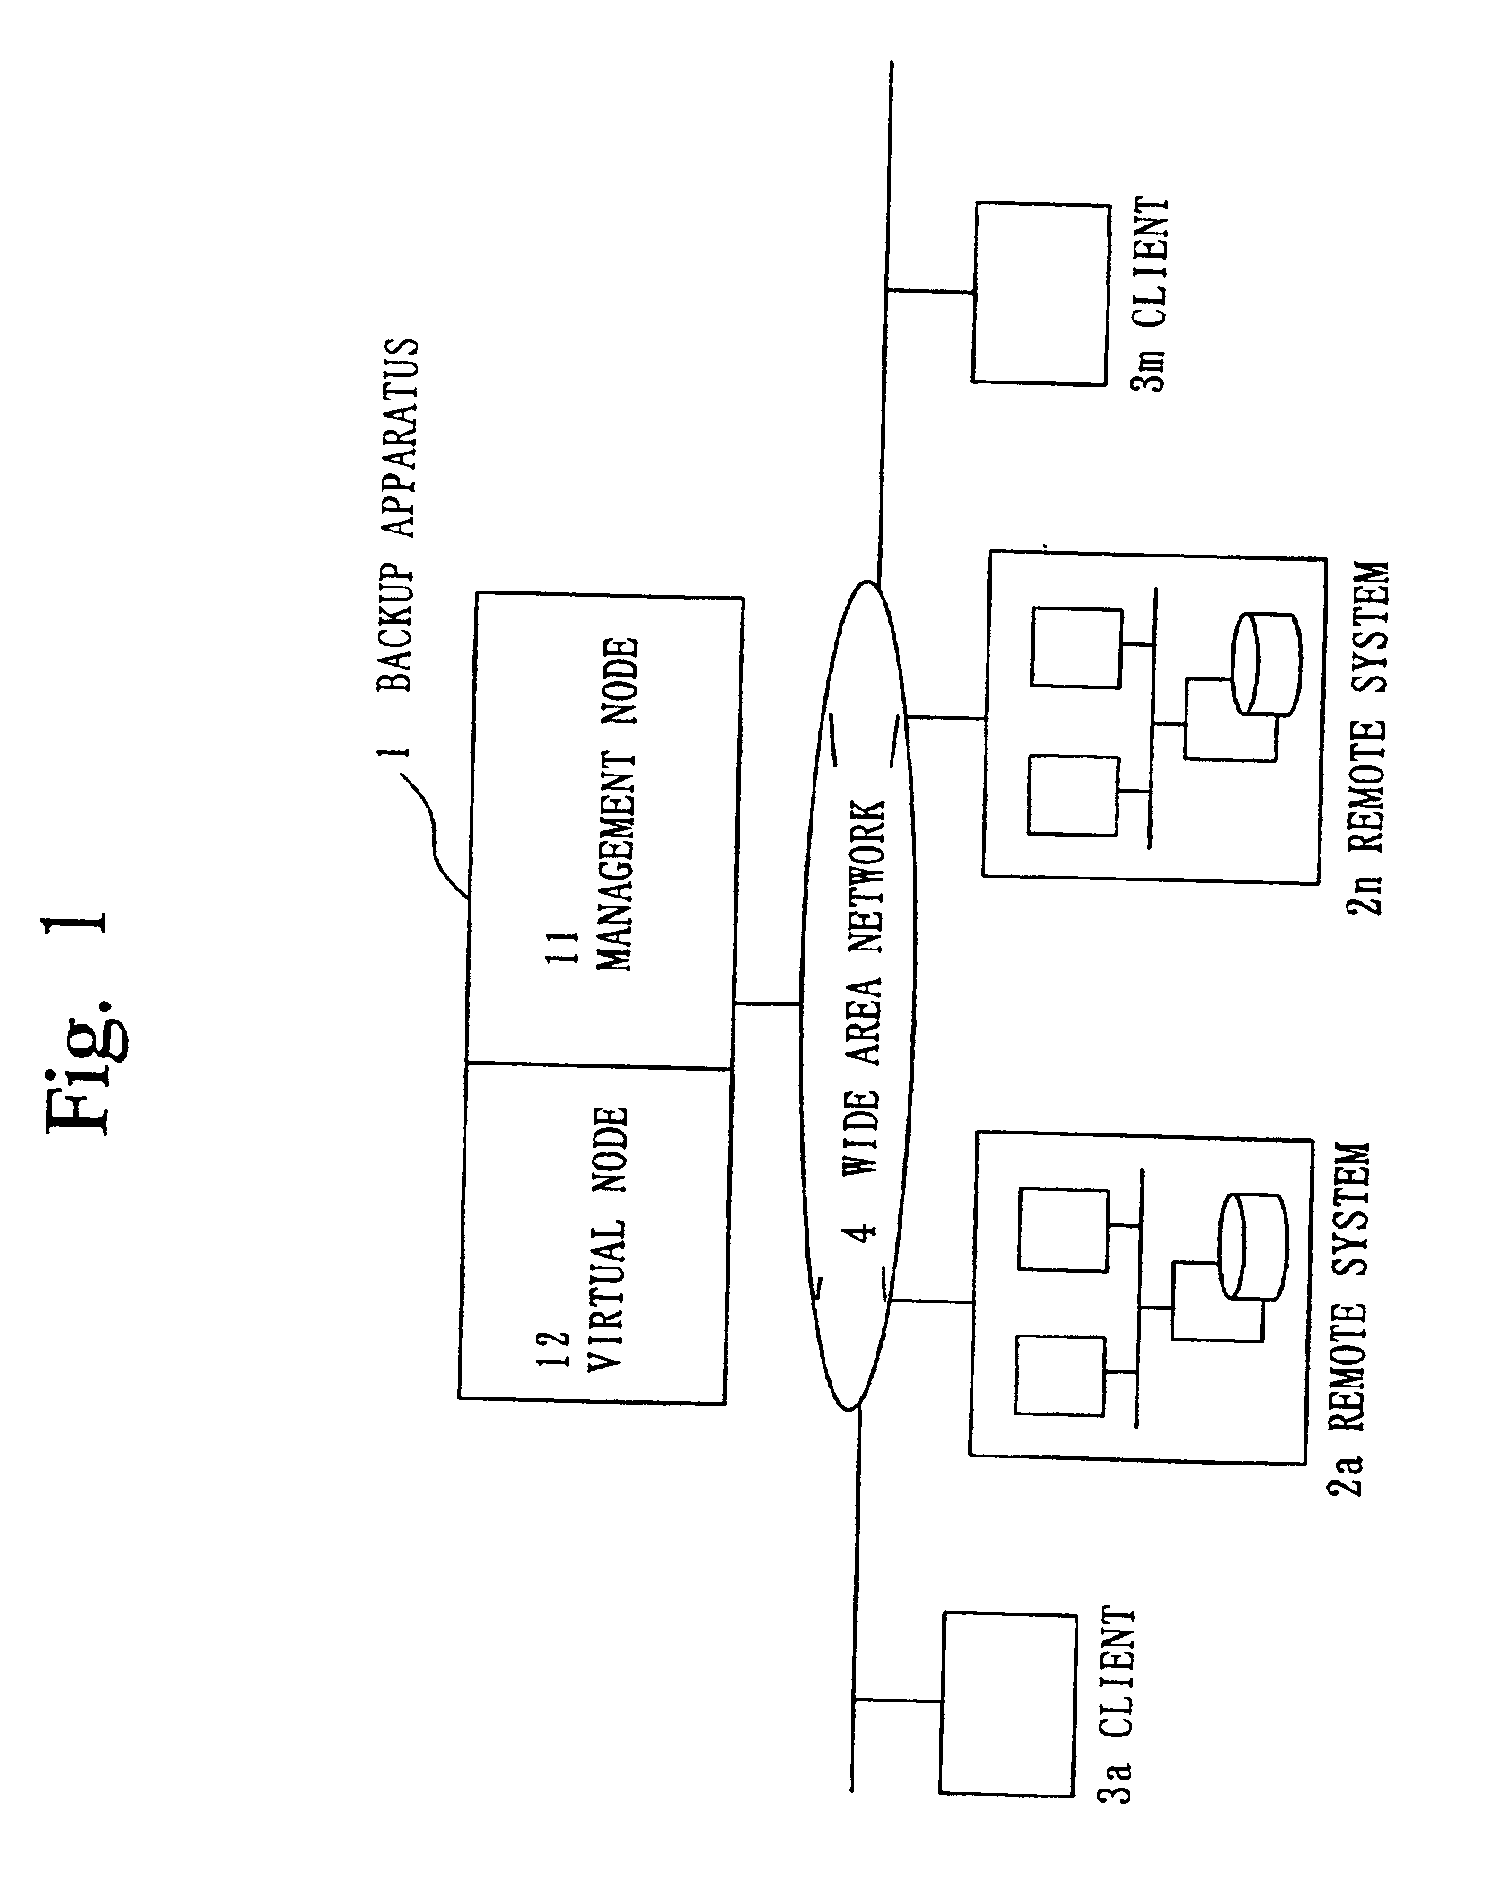 Backup system and method for distributed systems